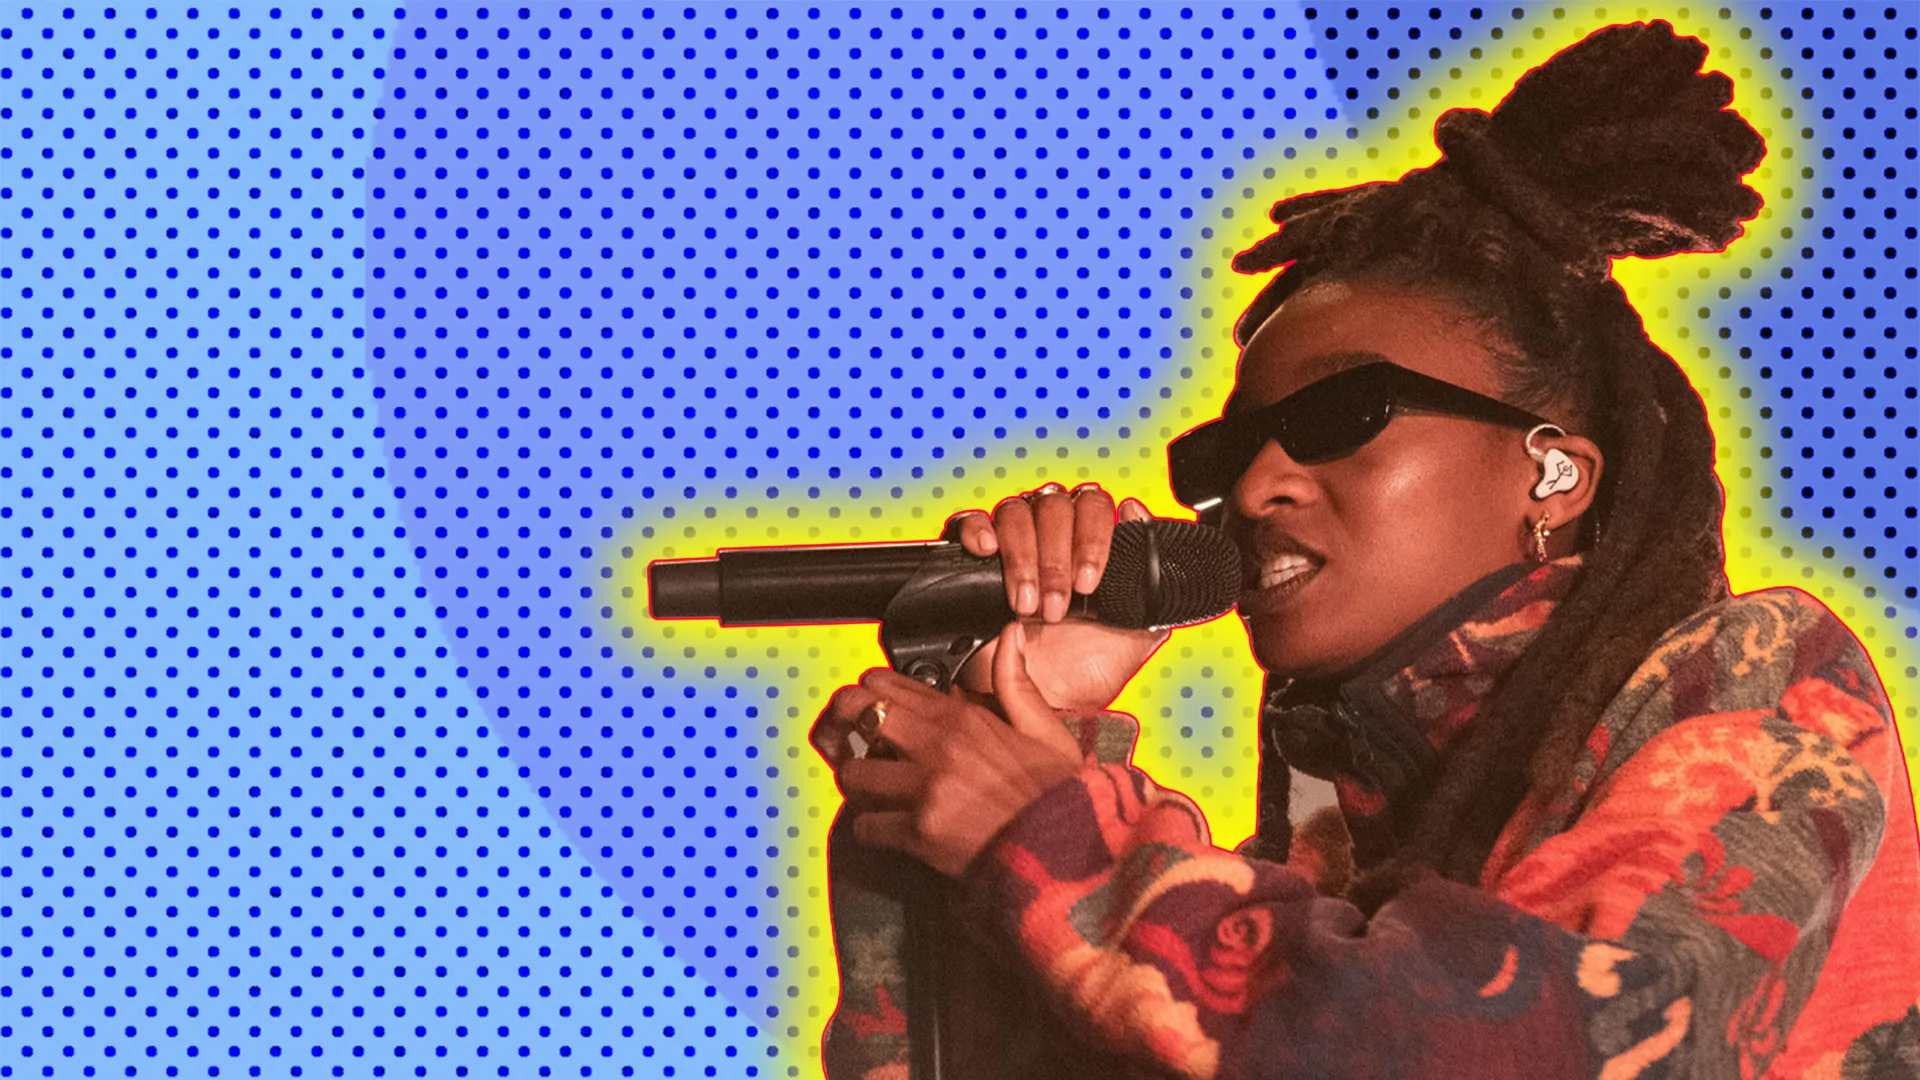 Little Simz performing with a yellow glow on a blue polka dot background